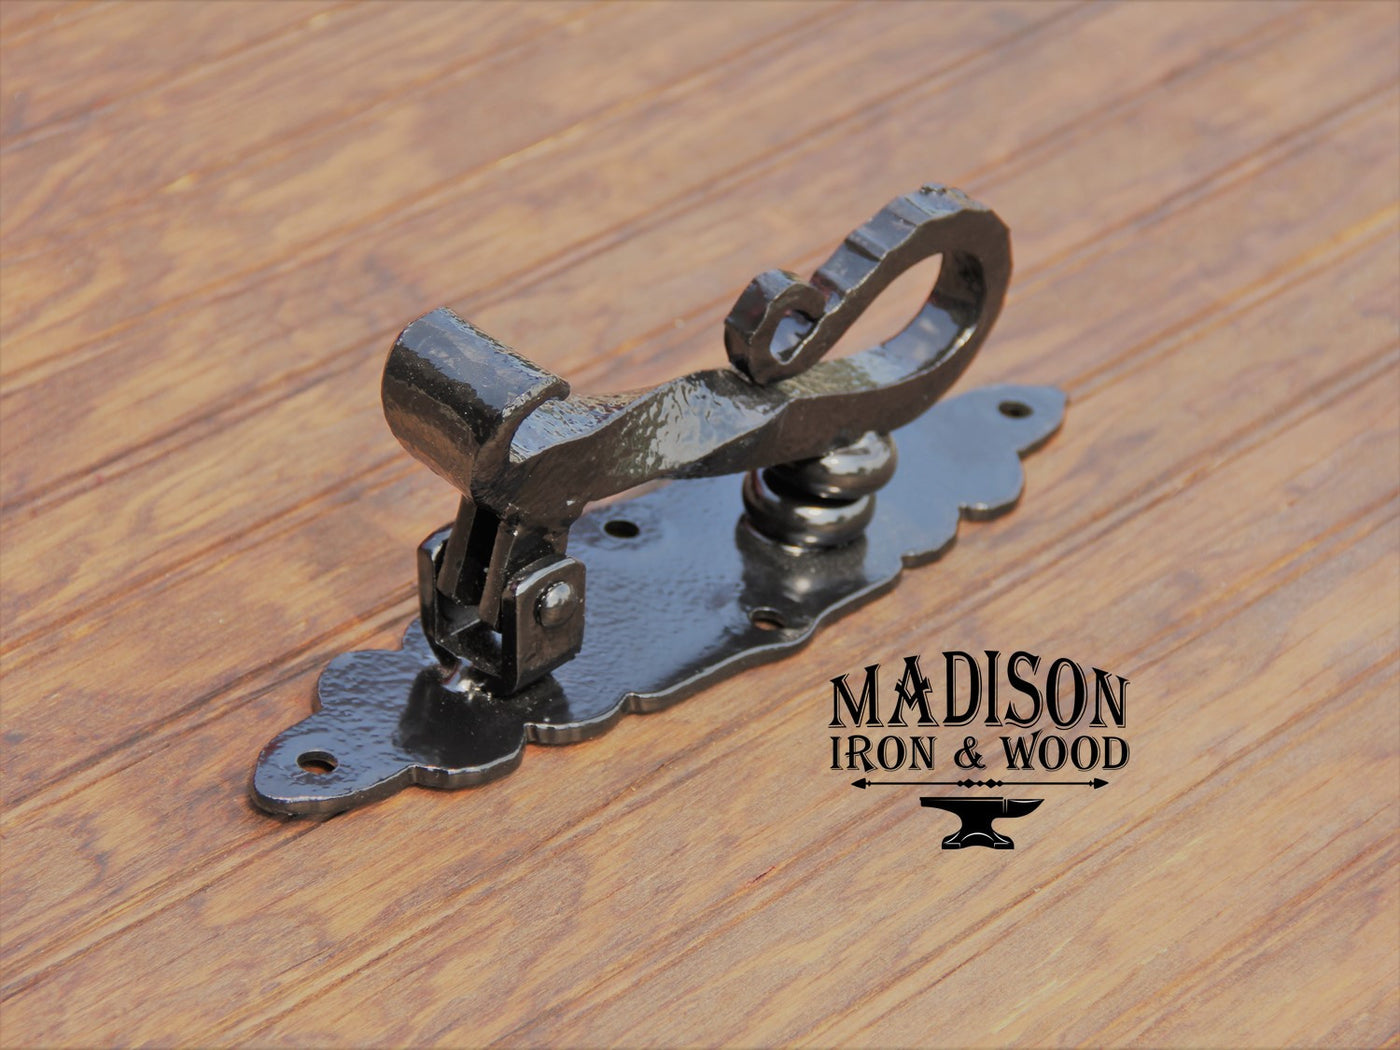 Wrought Iron Door Knocker - Madison Iron and Wood - Knocker - metal outdoor decor - Steel deocrations - american made products - veteran owned business products - fencing decorations - fencing supplies - custom wall decorations - personalized wall signs - steel - decorative post caps - steel post caps - metal post caps - brackets - structural brackets - home improvement - easter - easter decorations - easter gift - easter yard decor